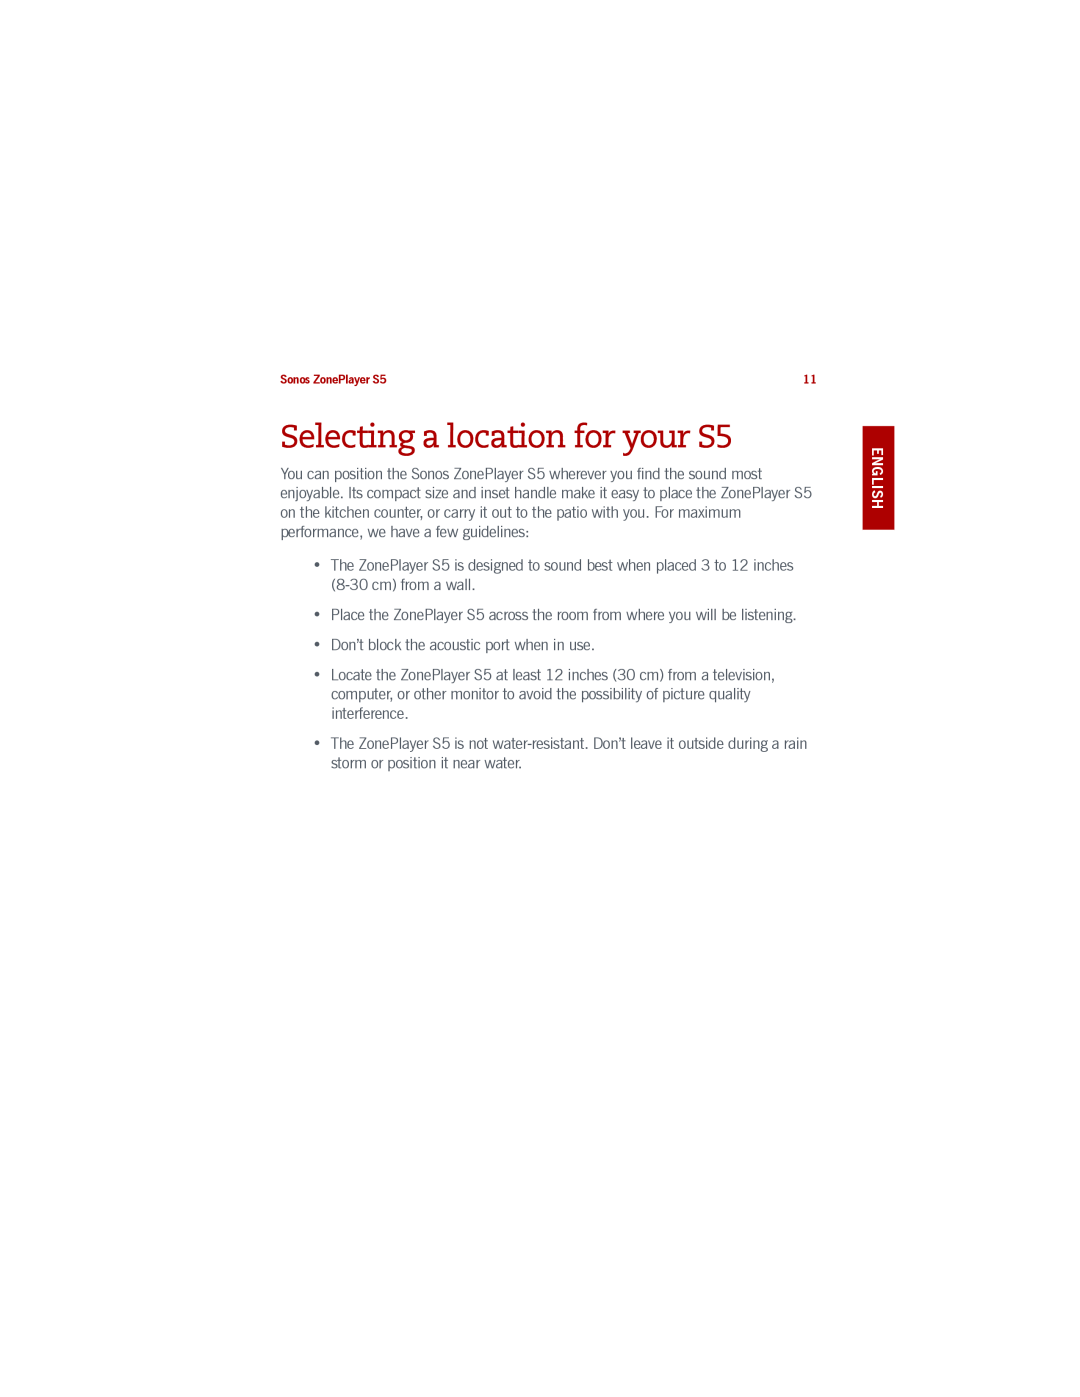 Sonos manual Selecting a location for your S5 